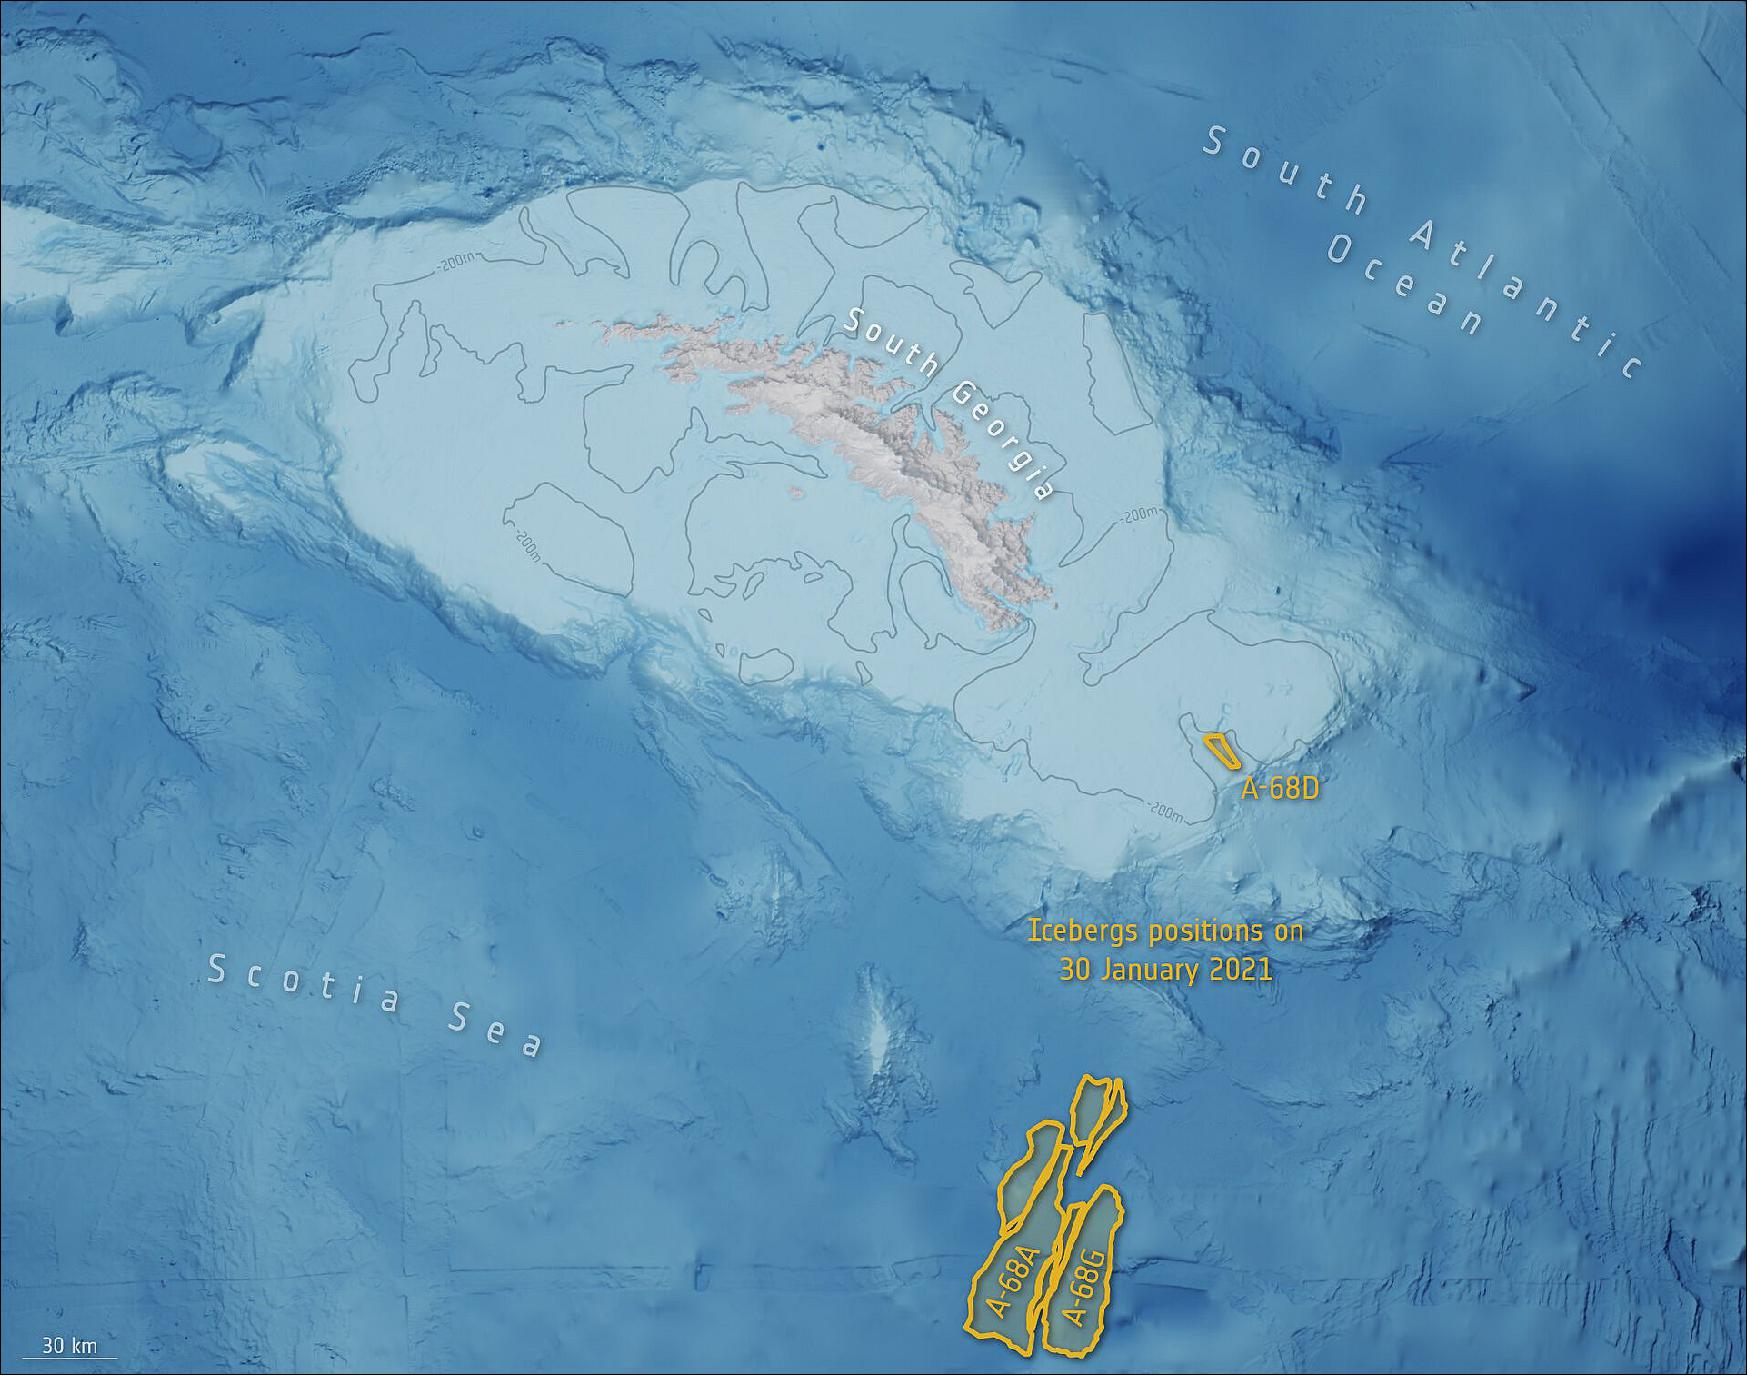  A-68 iceberg positions on 30 January